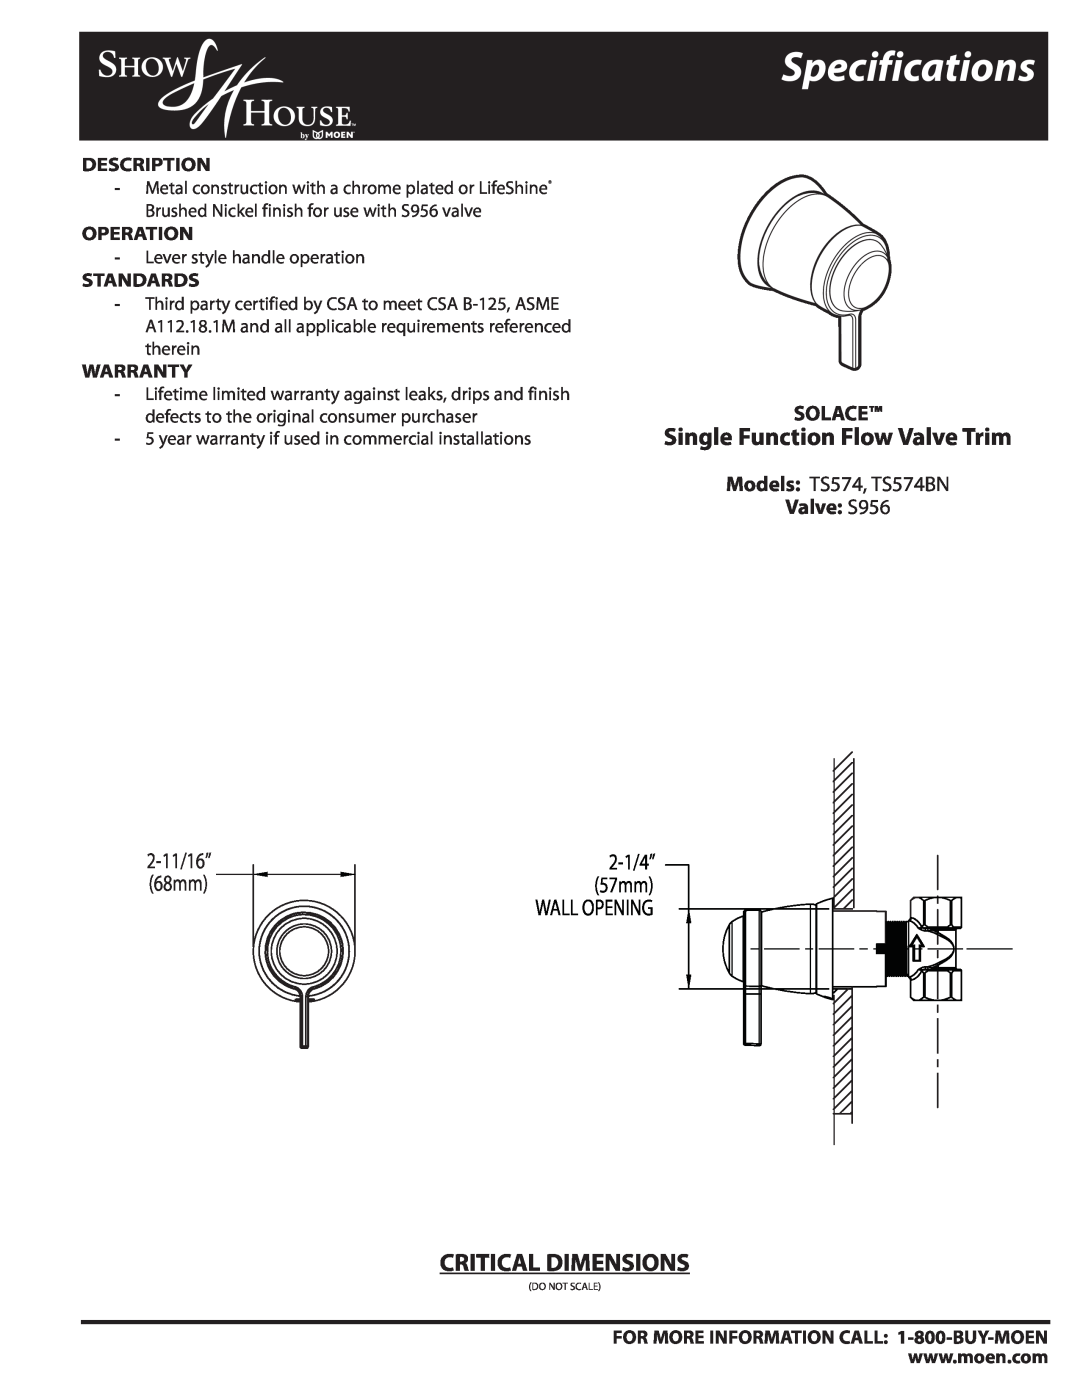 Moen TS574BN specifications Specifications, Single Function Flow Valve Trim, Critical Dimensions, Wall Opening, Solace 